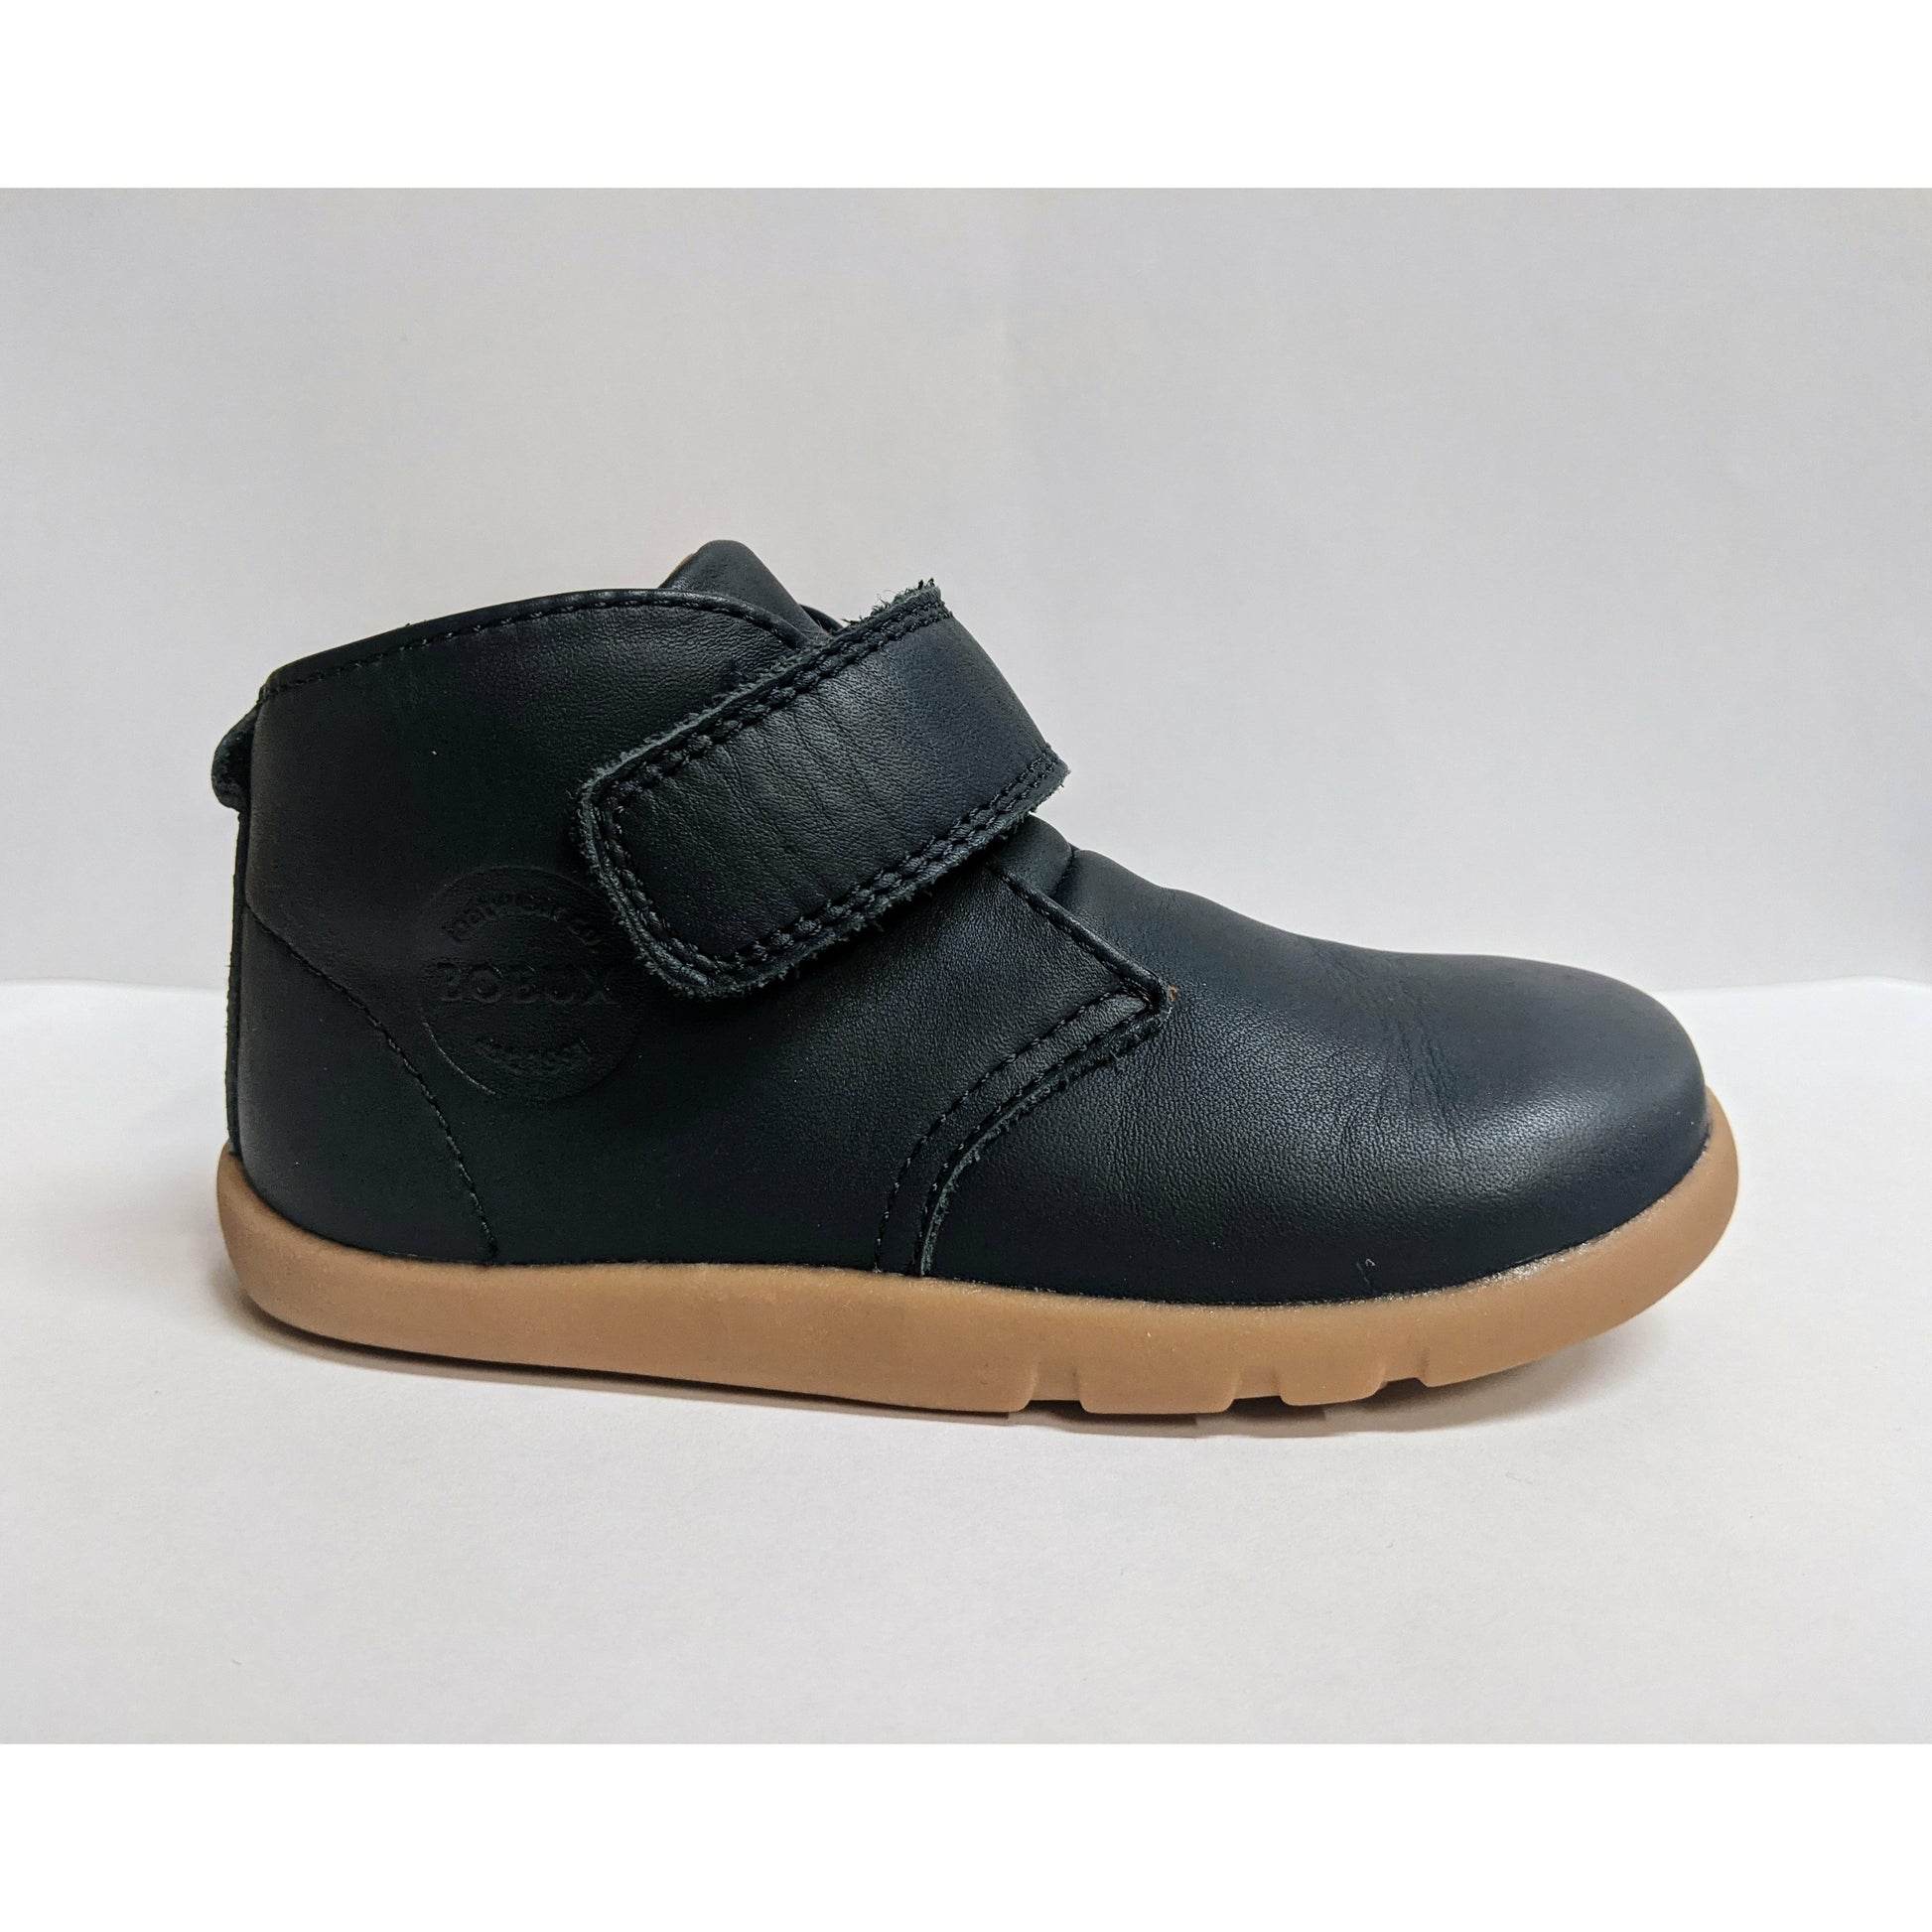 A boys ankle boot by Bobux,style Desert,in Navy with velcro fastening.